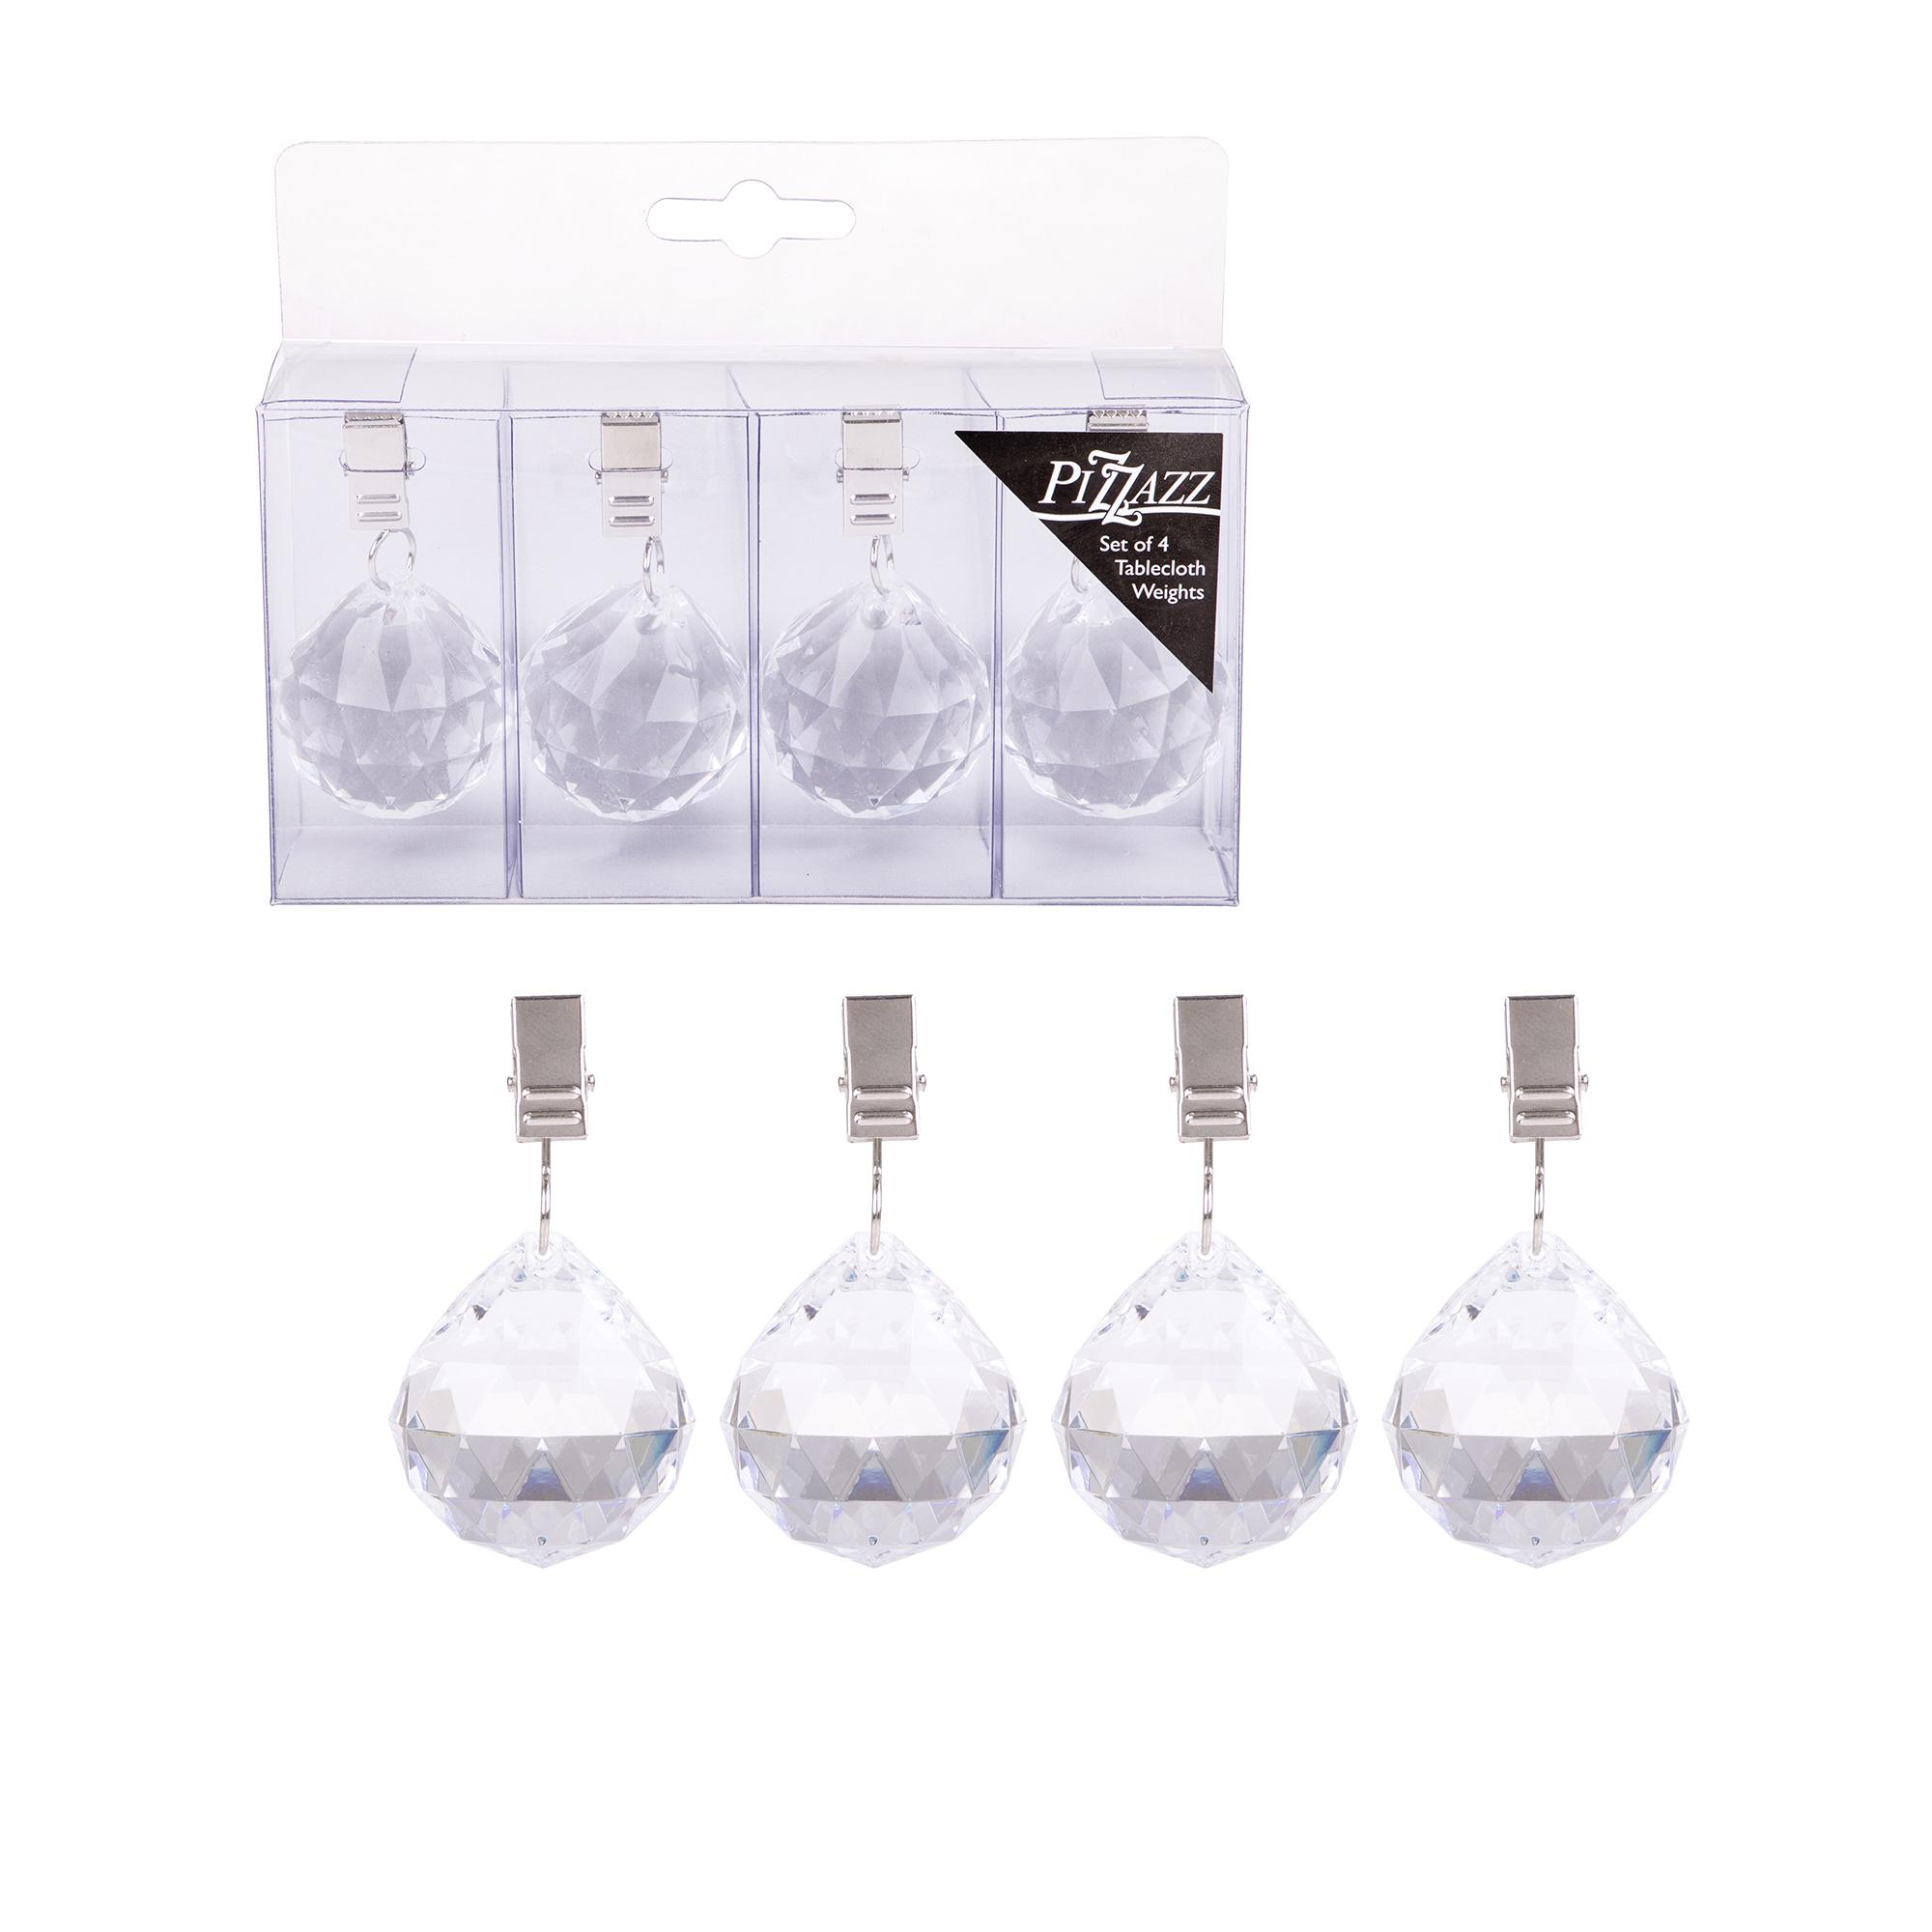 Pizzazz Acrylic Crystal Tablecloth Weights 4pk Image 3